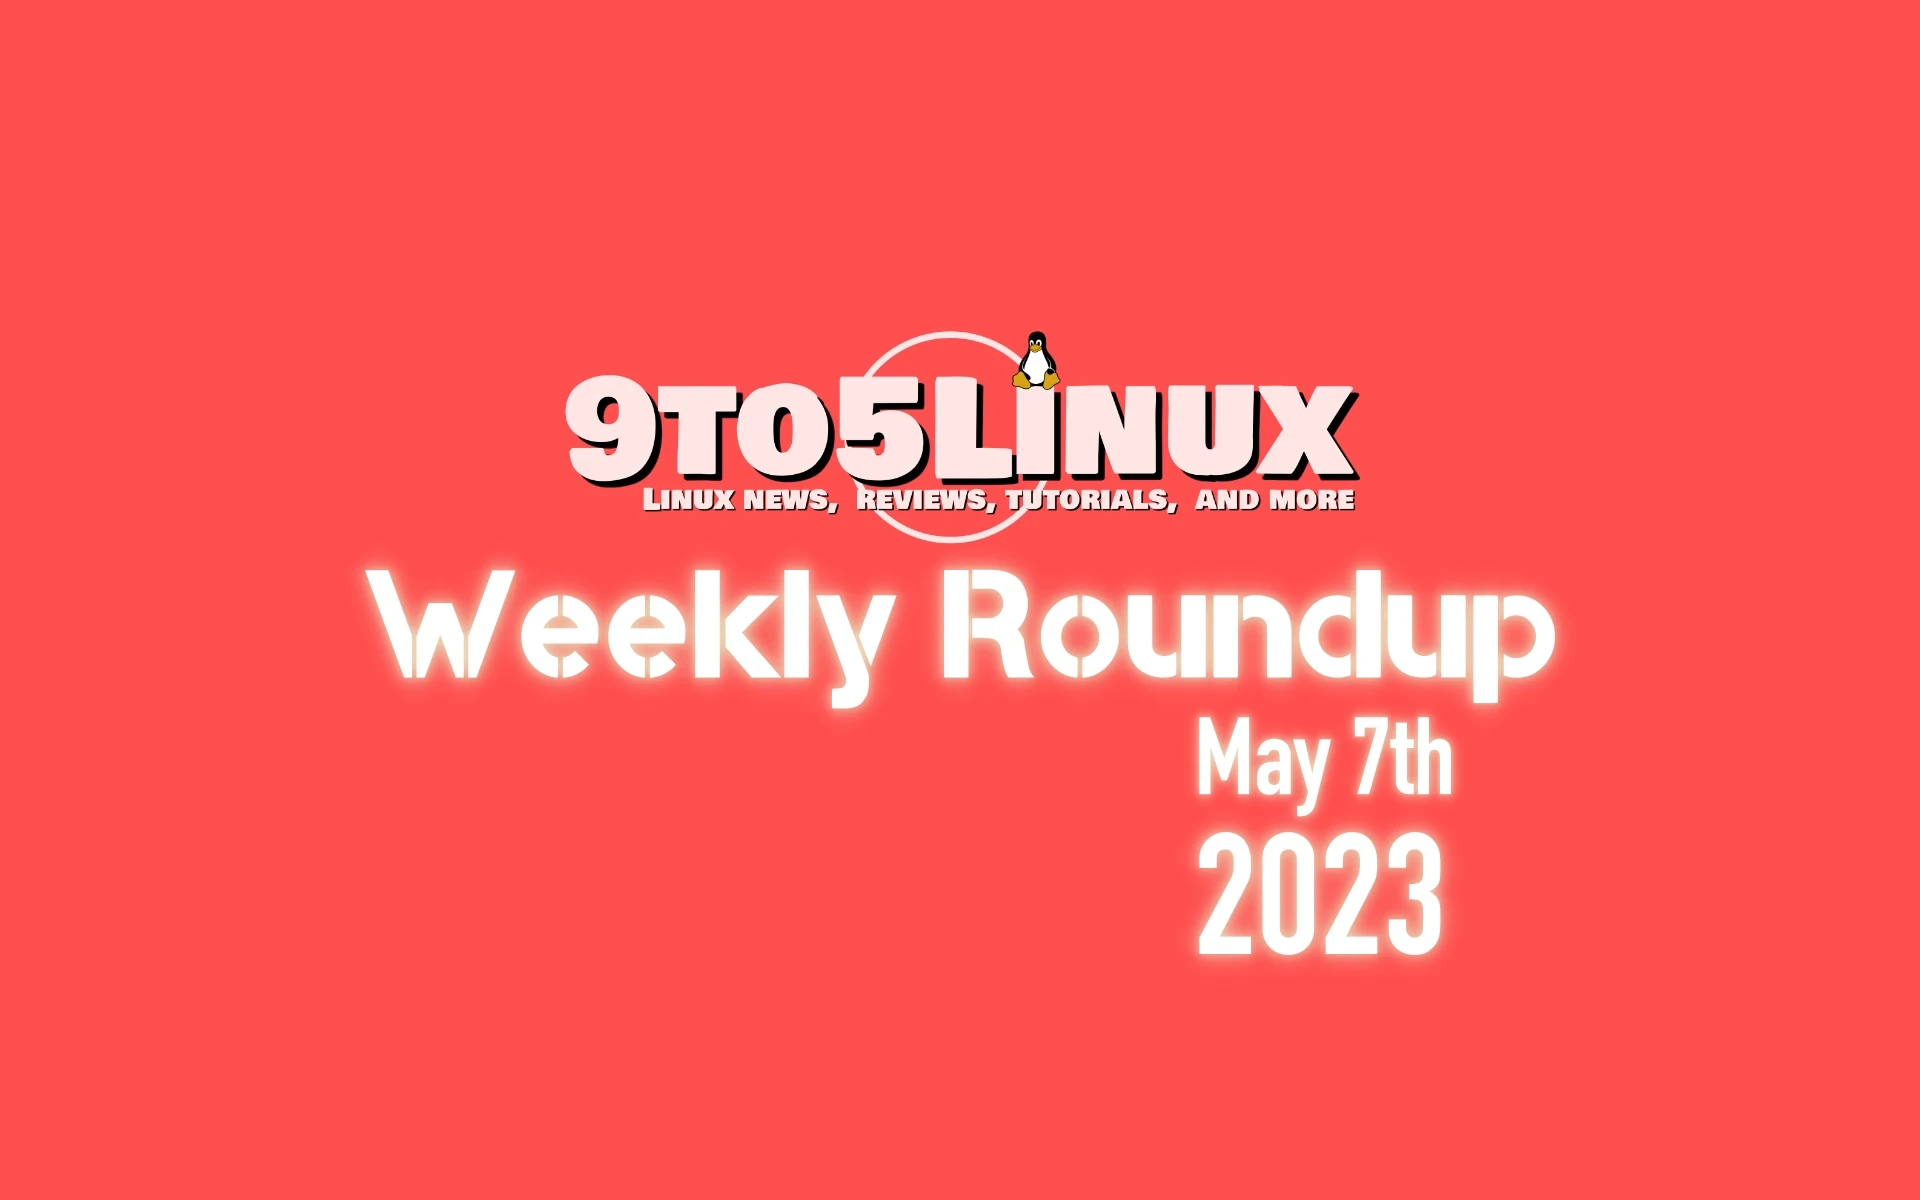 9to5Linux Weekly Roundup: May 7th, 2023